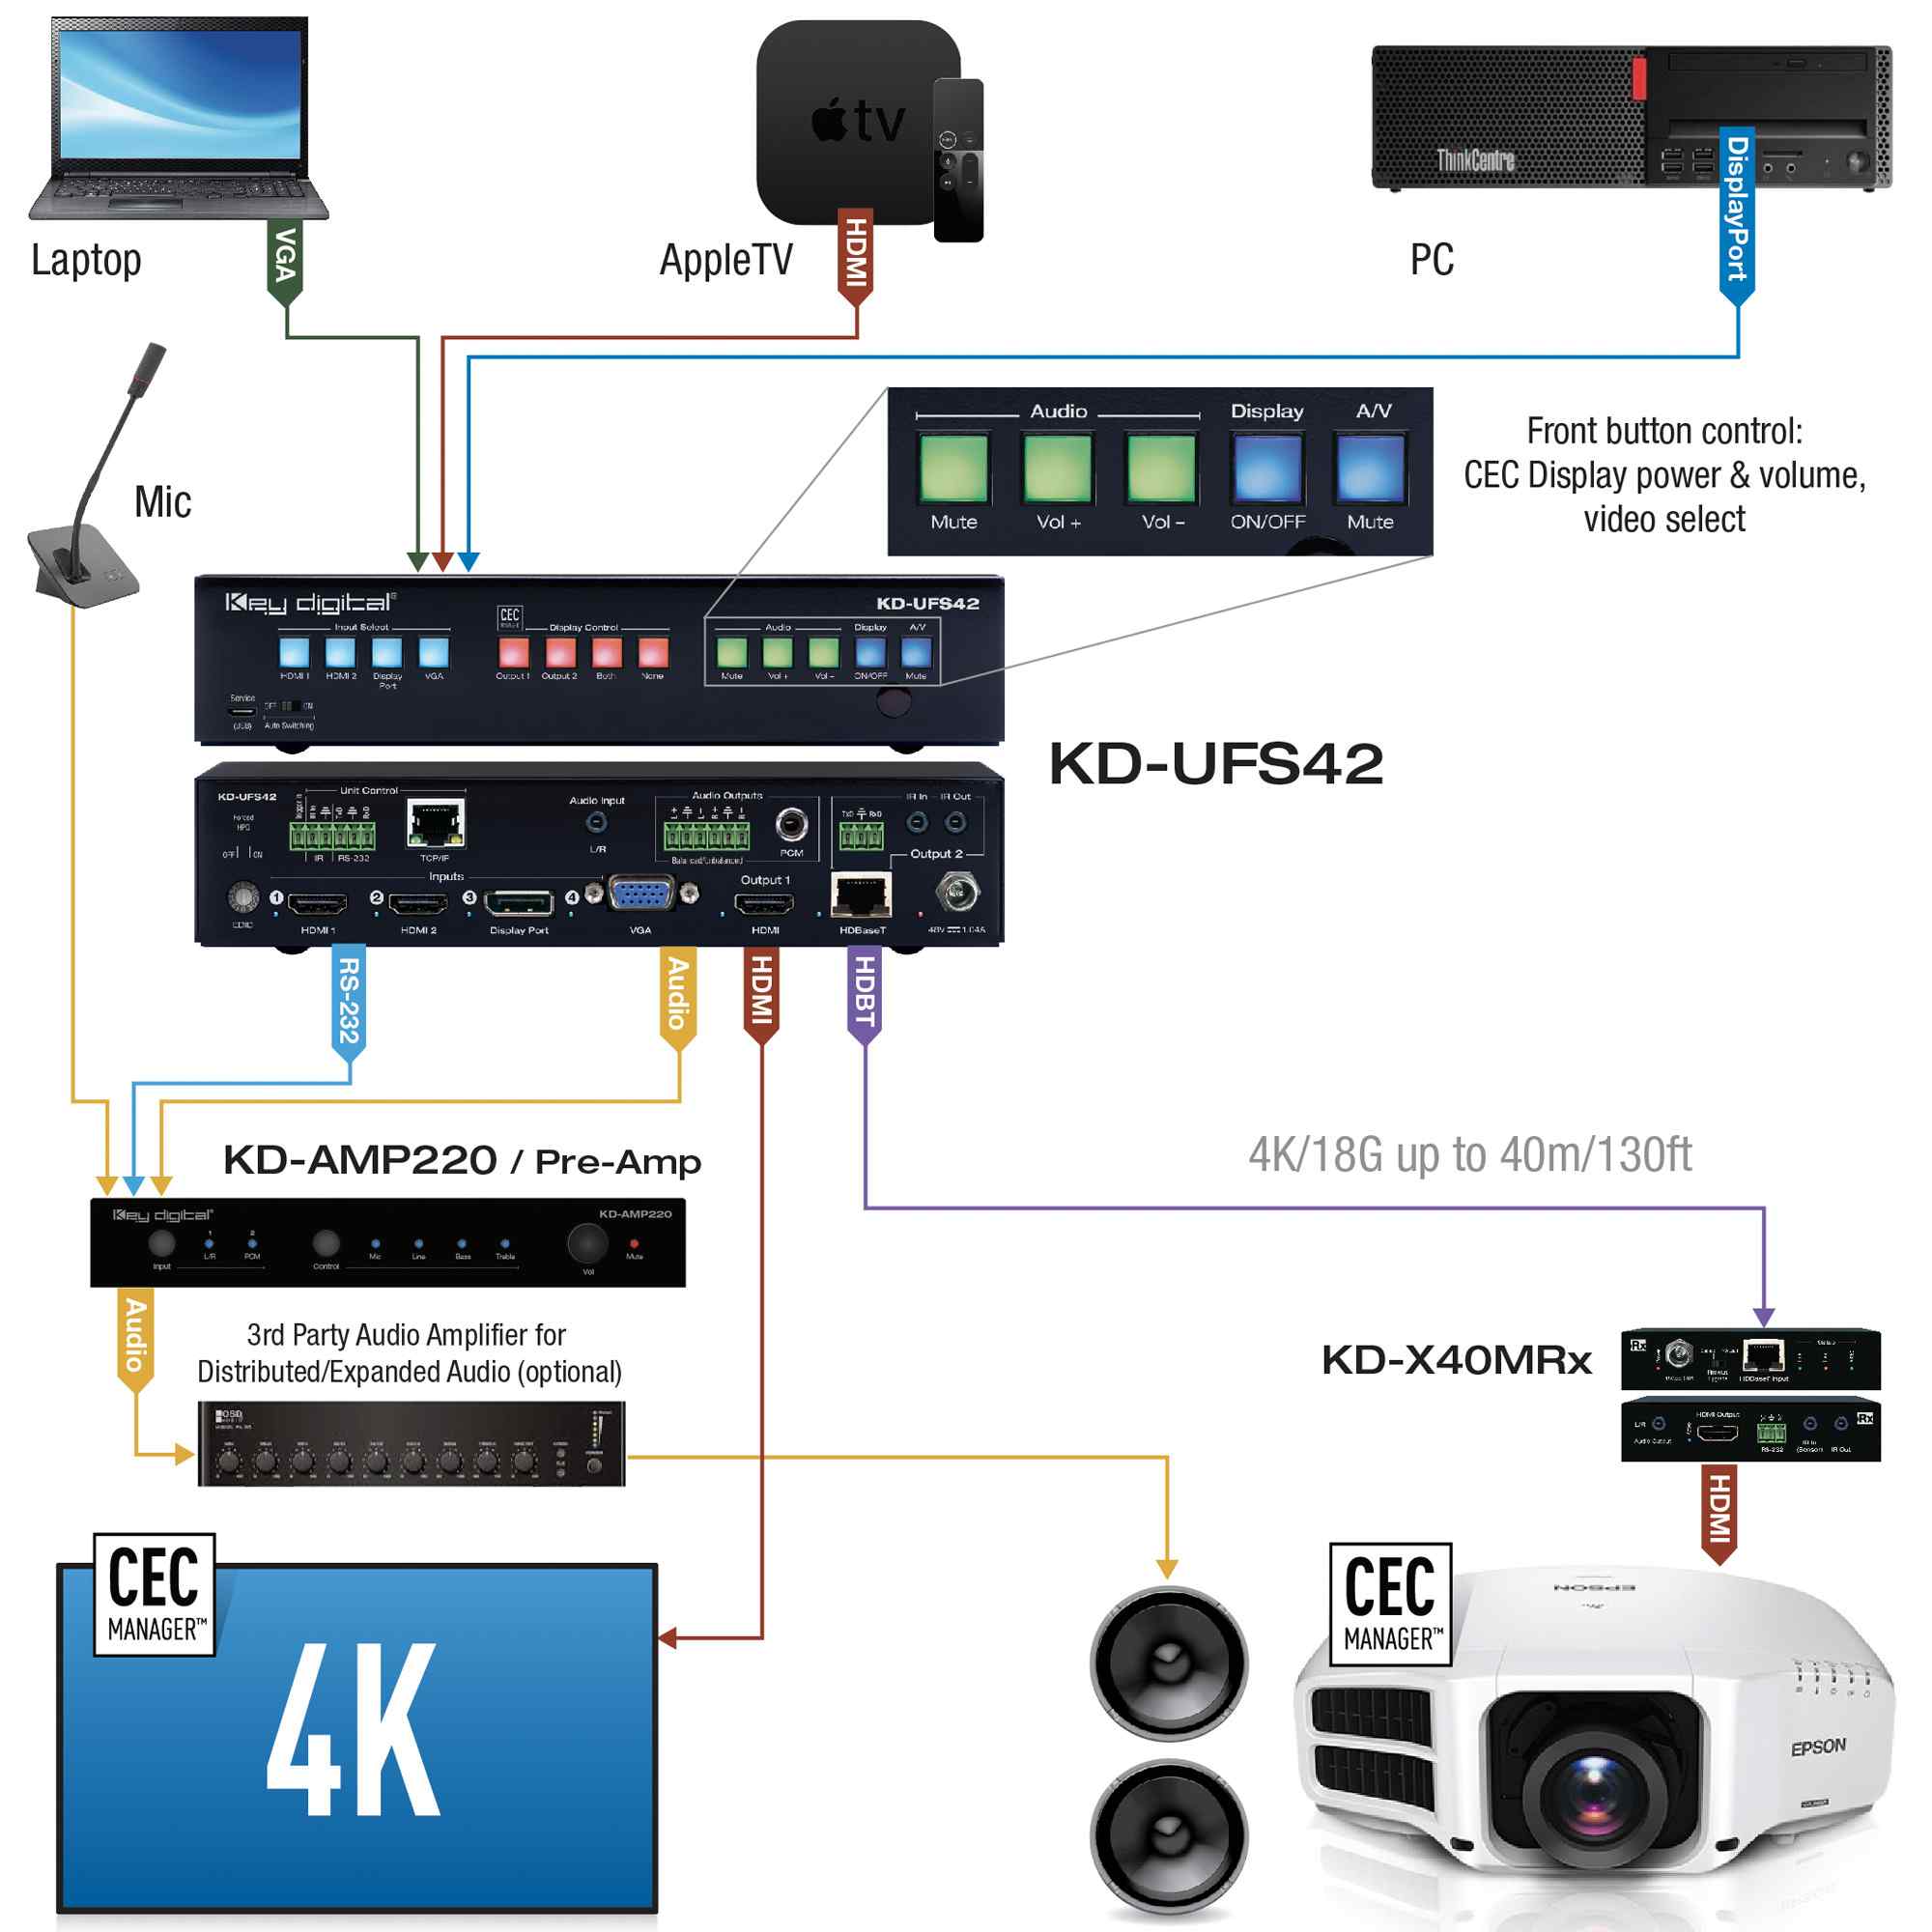 Thumbnail of Key Digital hdbaset switcher connected to multiple devices